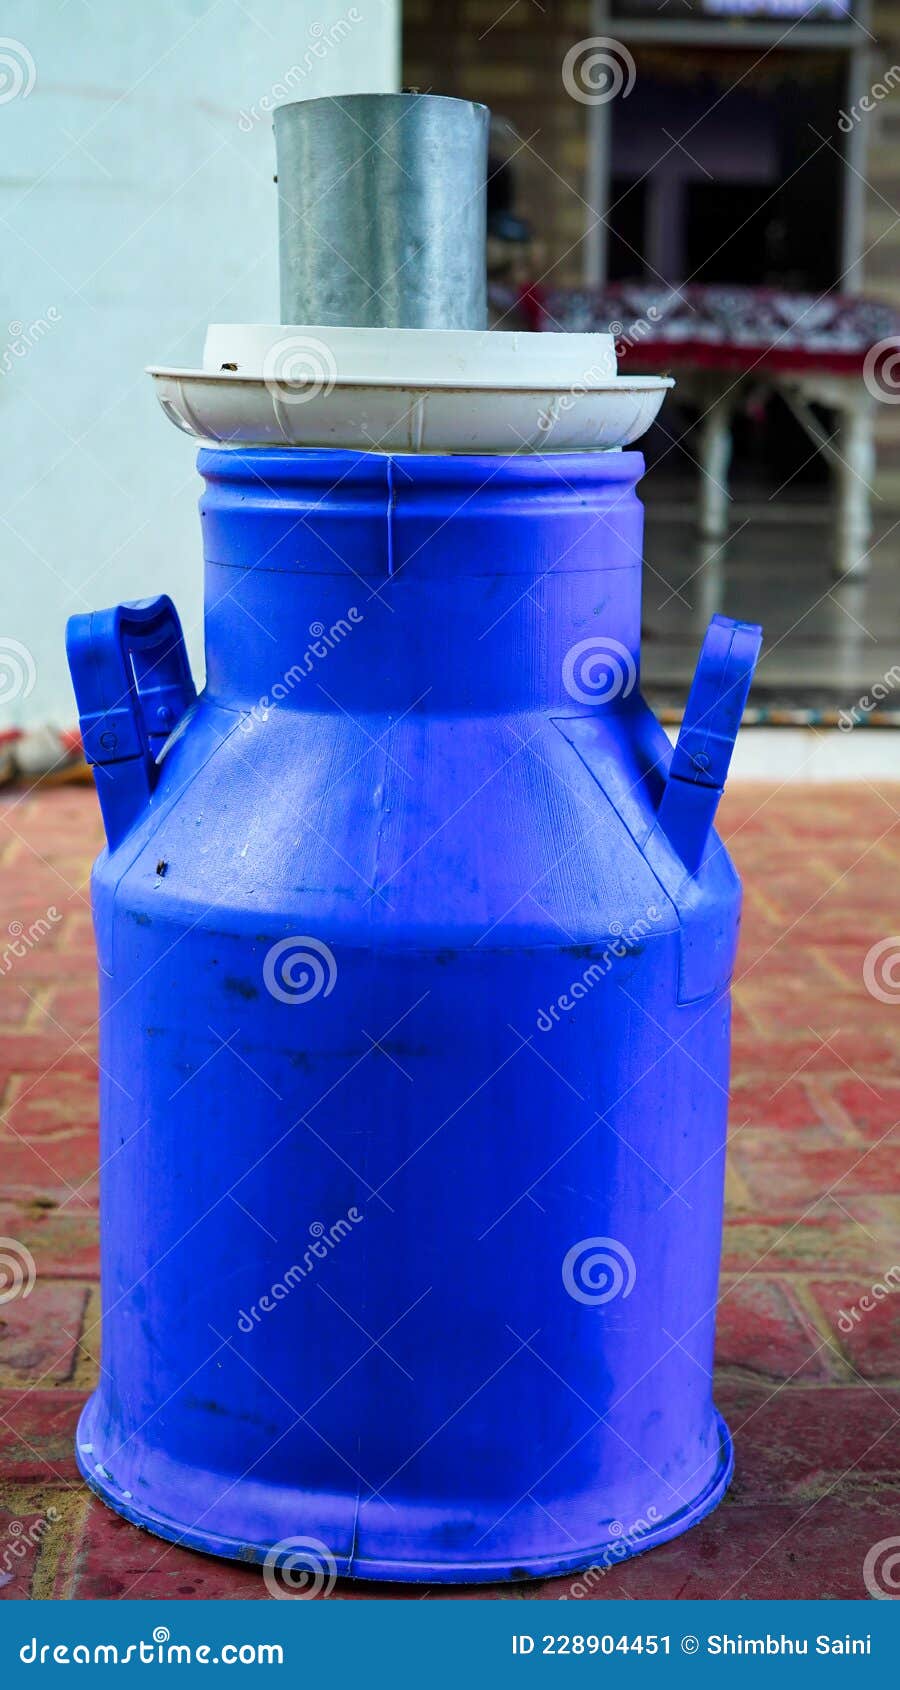 Close Up Shot of Blue Plastic Milk Container or Can Stock Image - Image of  milkman, landscape: 228904451